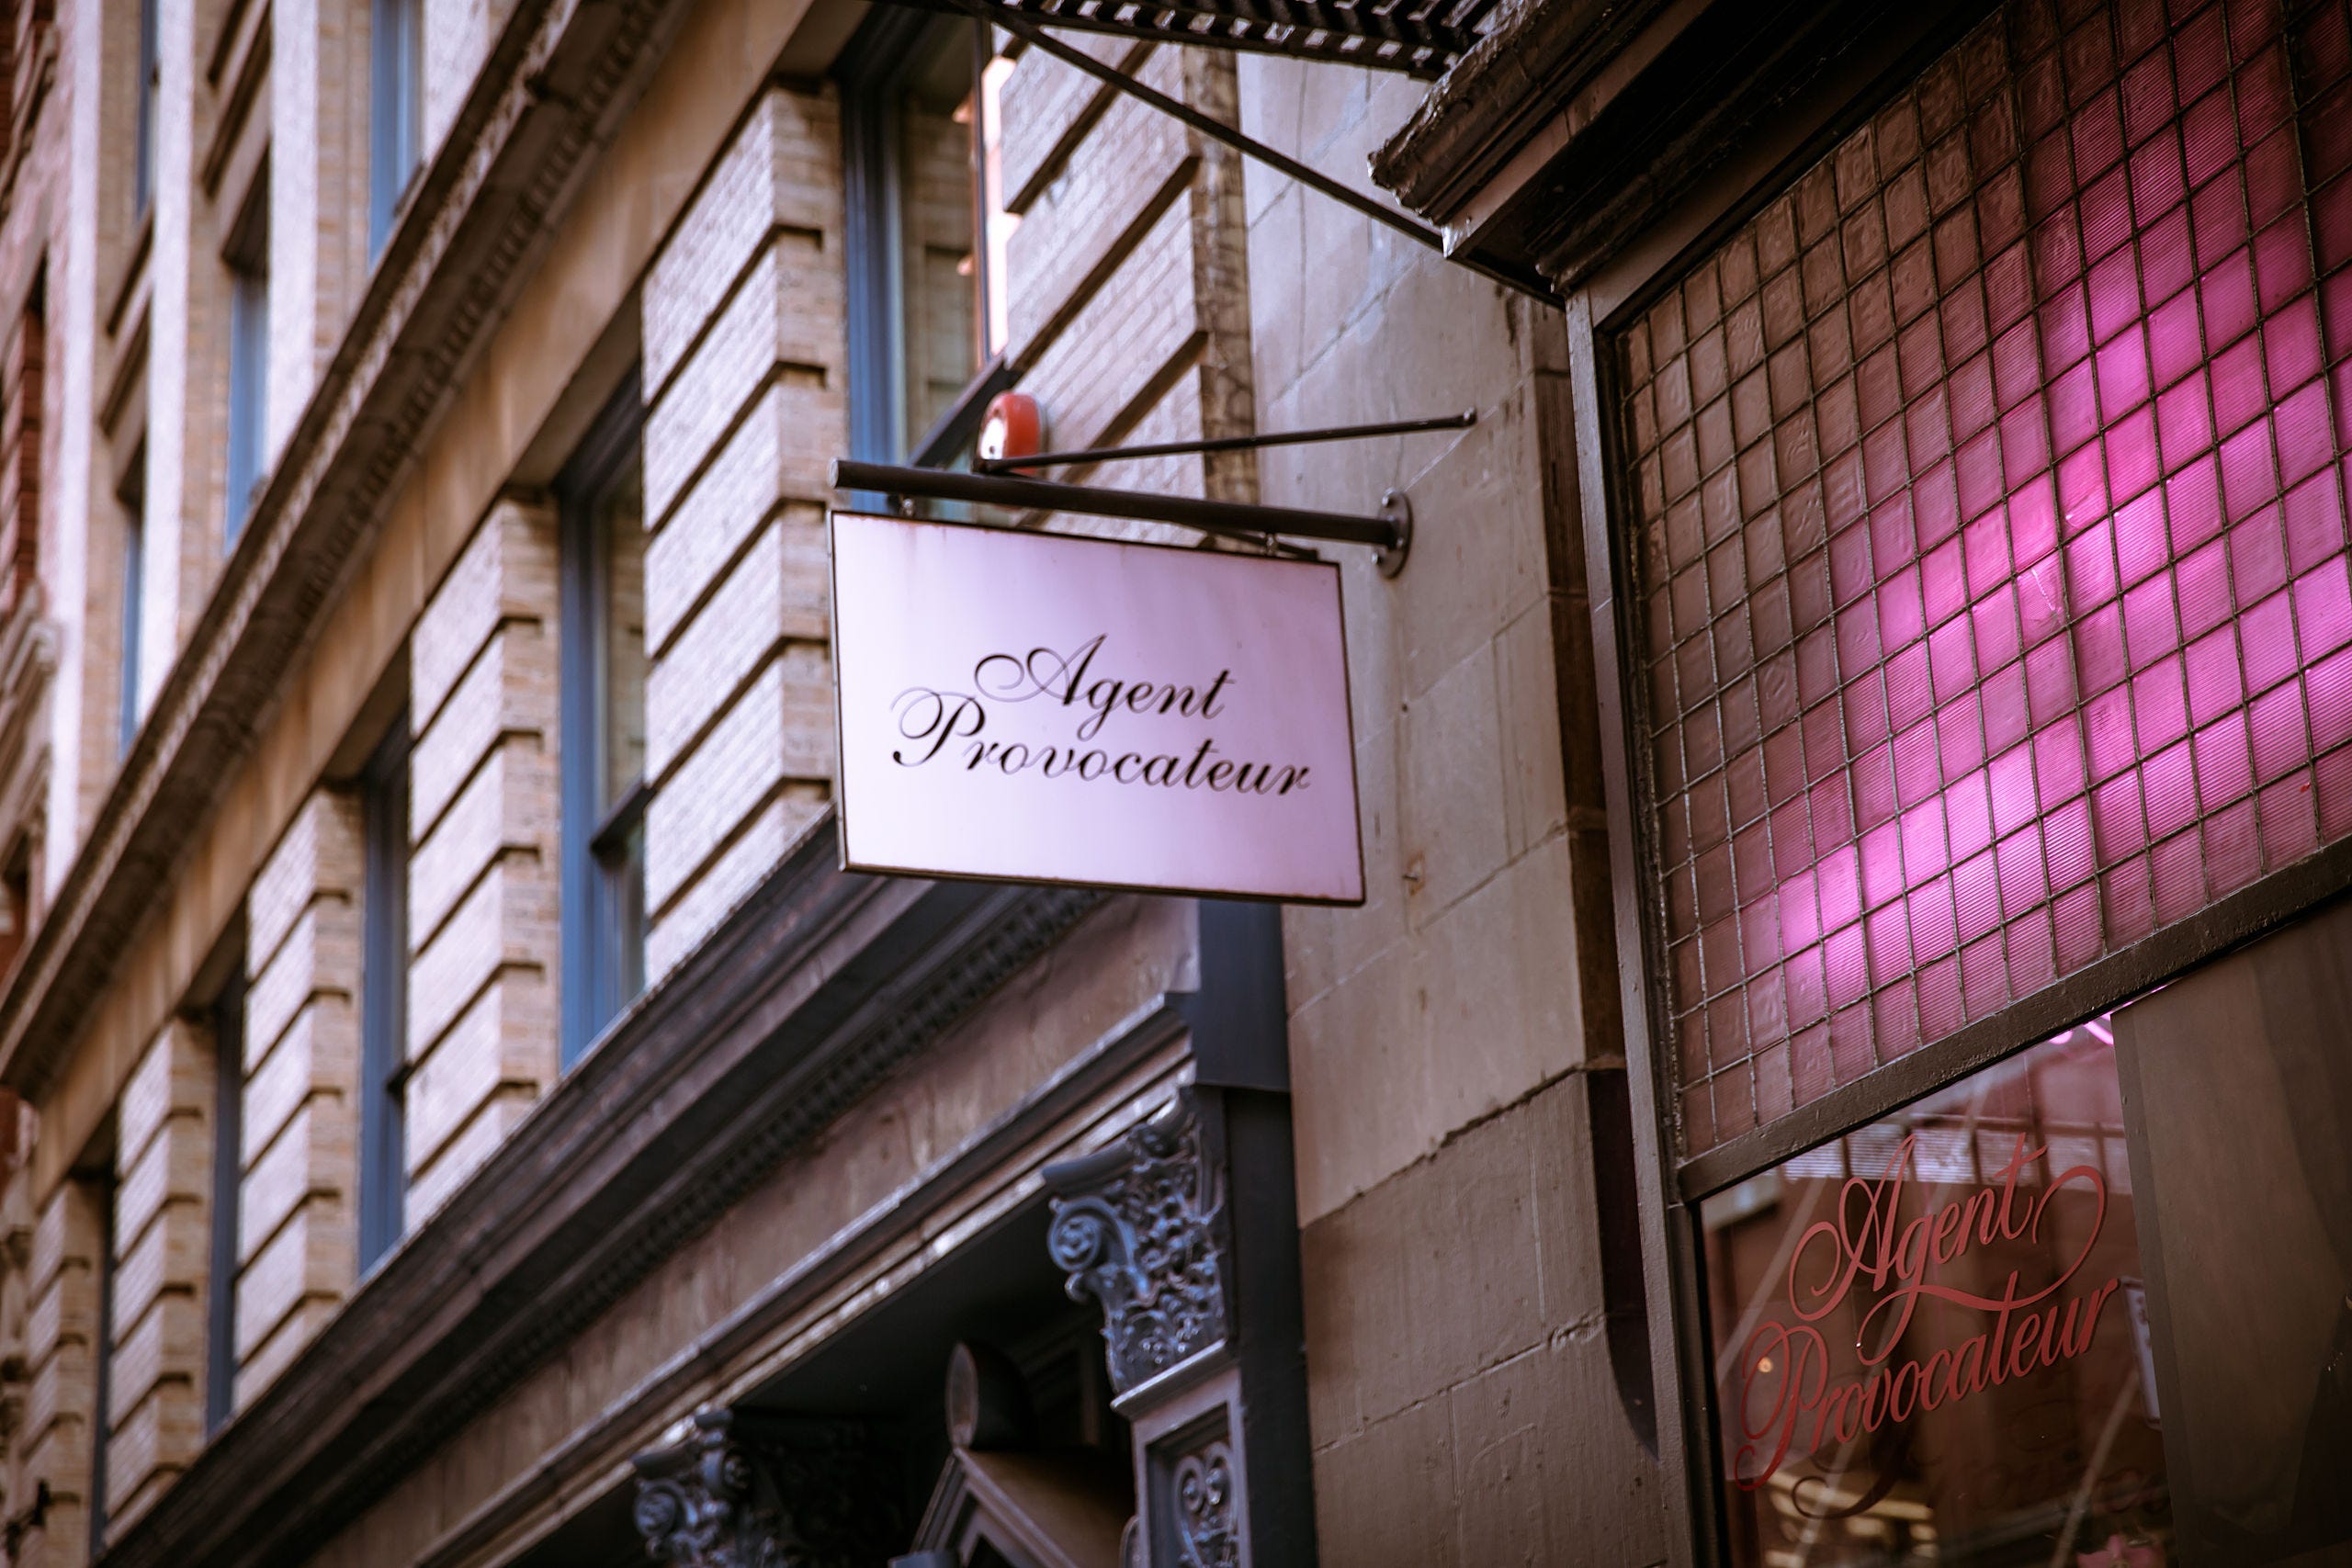 Agent Provocateur and Ginch Gonch | by Zhan Yalun | Medium